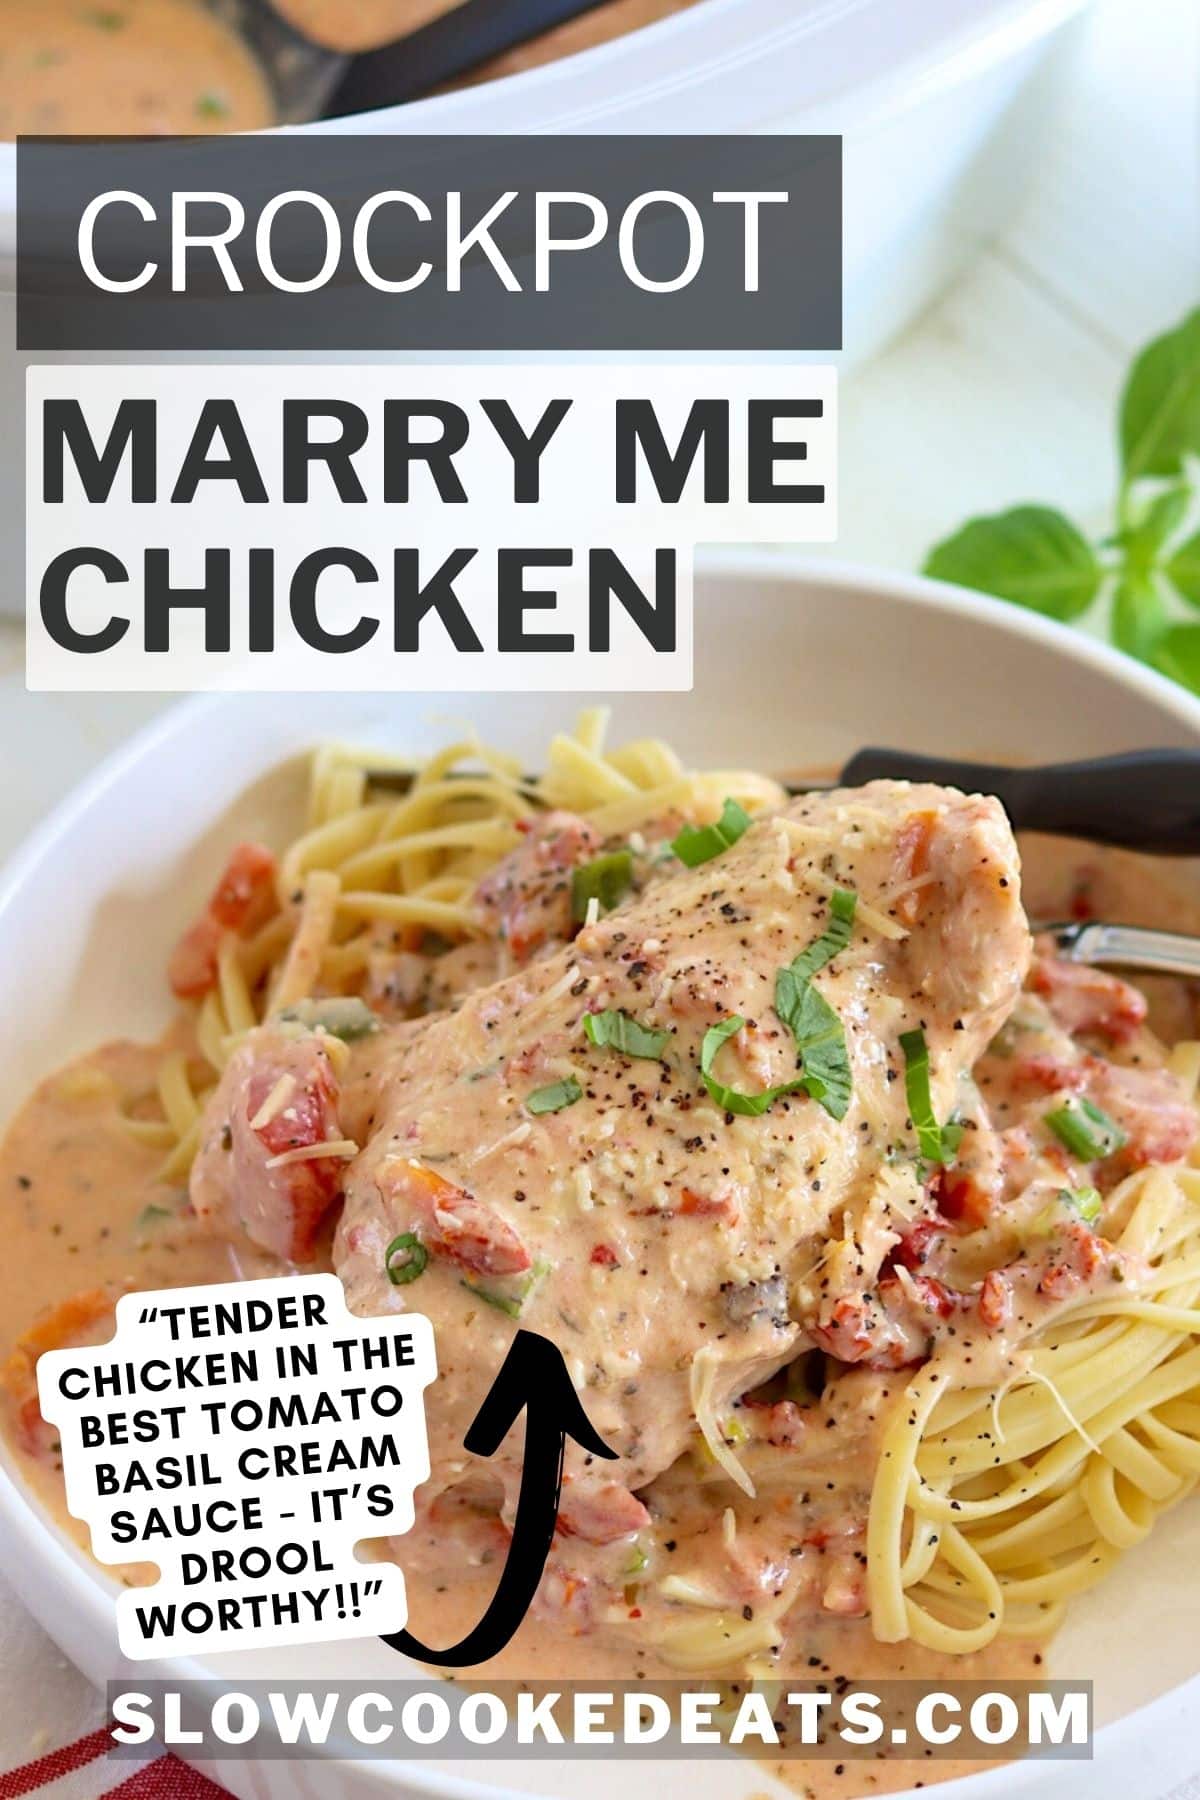 Marry me chicken crock pot recipe served over pasta and garnish with fresh basil on a white plate.